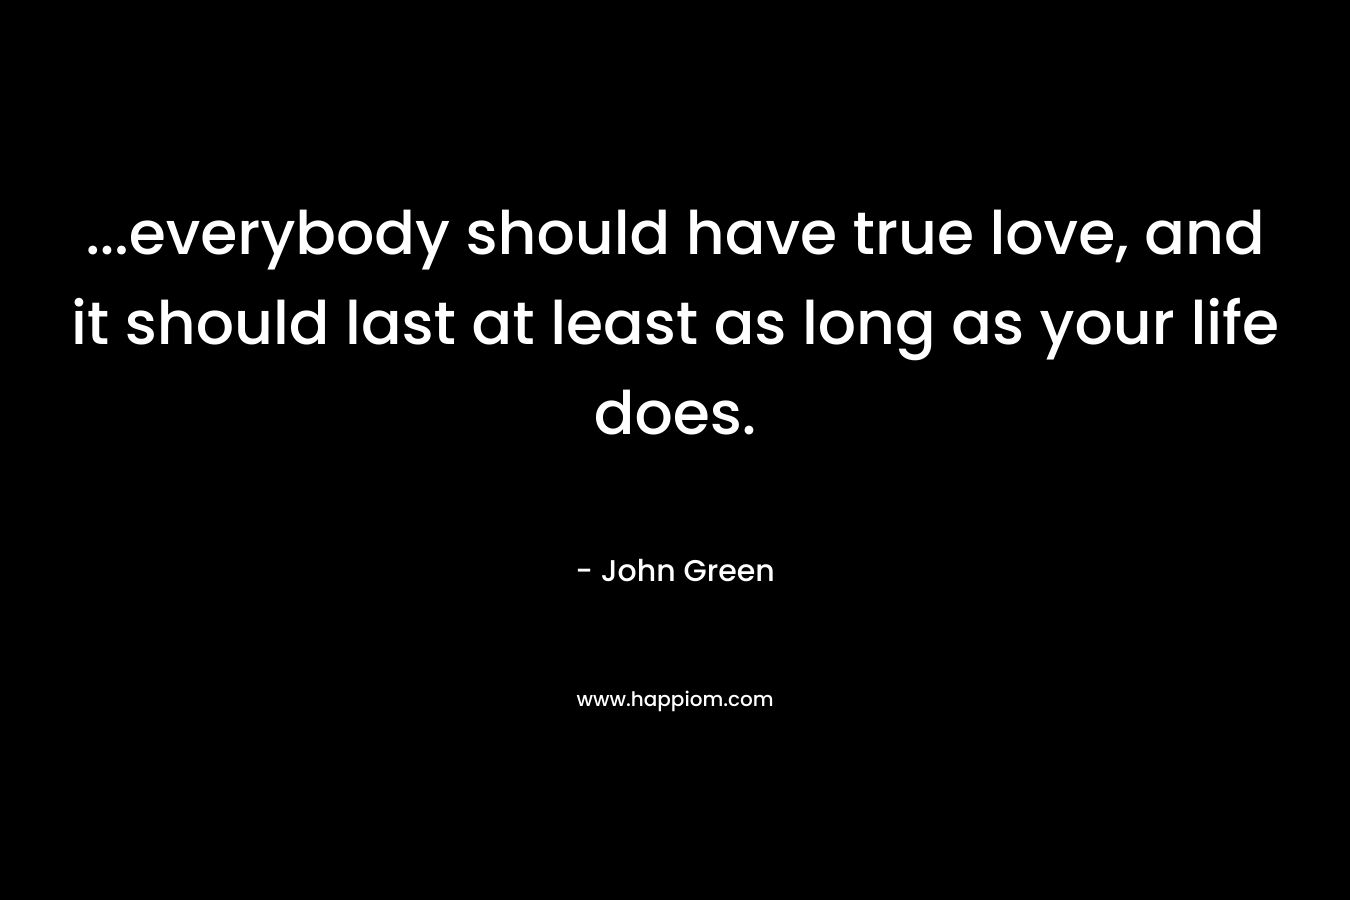 ...everybody should have true love, and it should last at least as long as your life does.